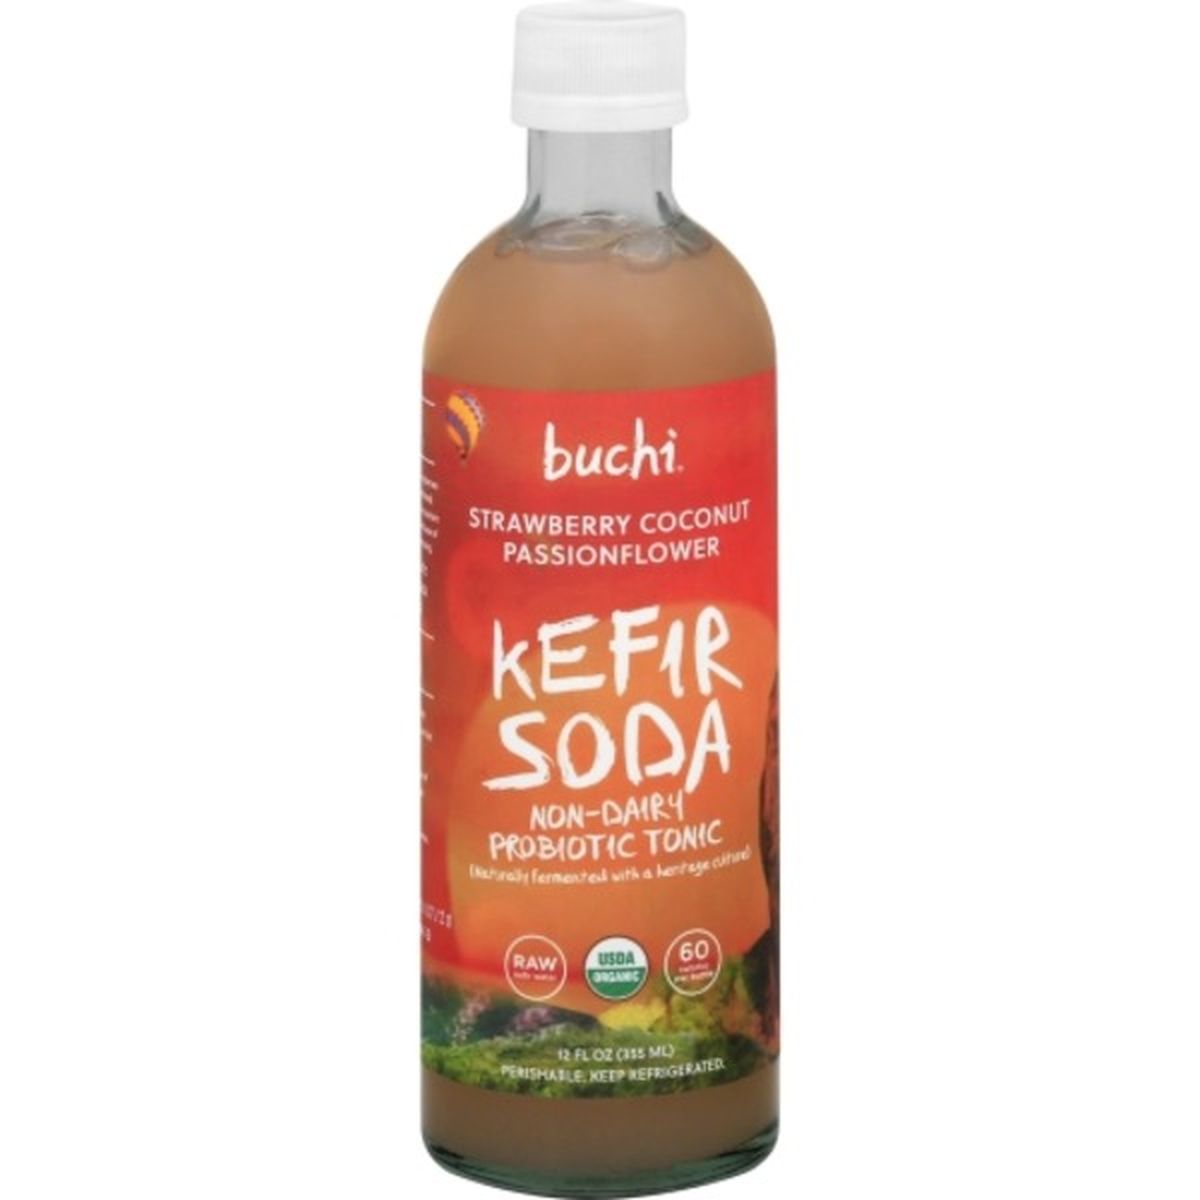 Calories in Buchi Kefir Soda, Strawberry Coconut Passionflower